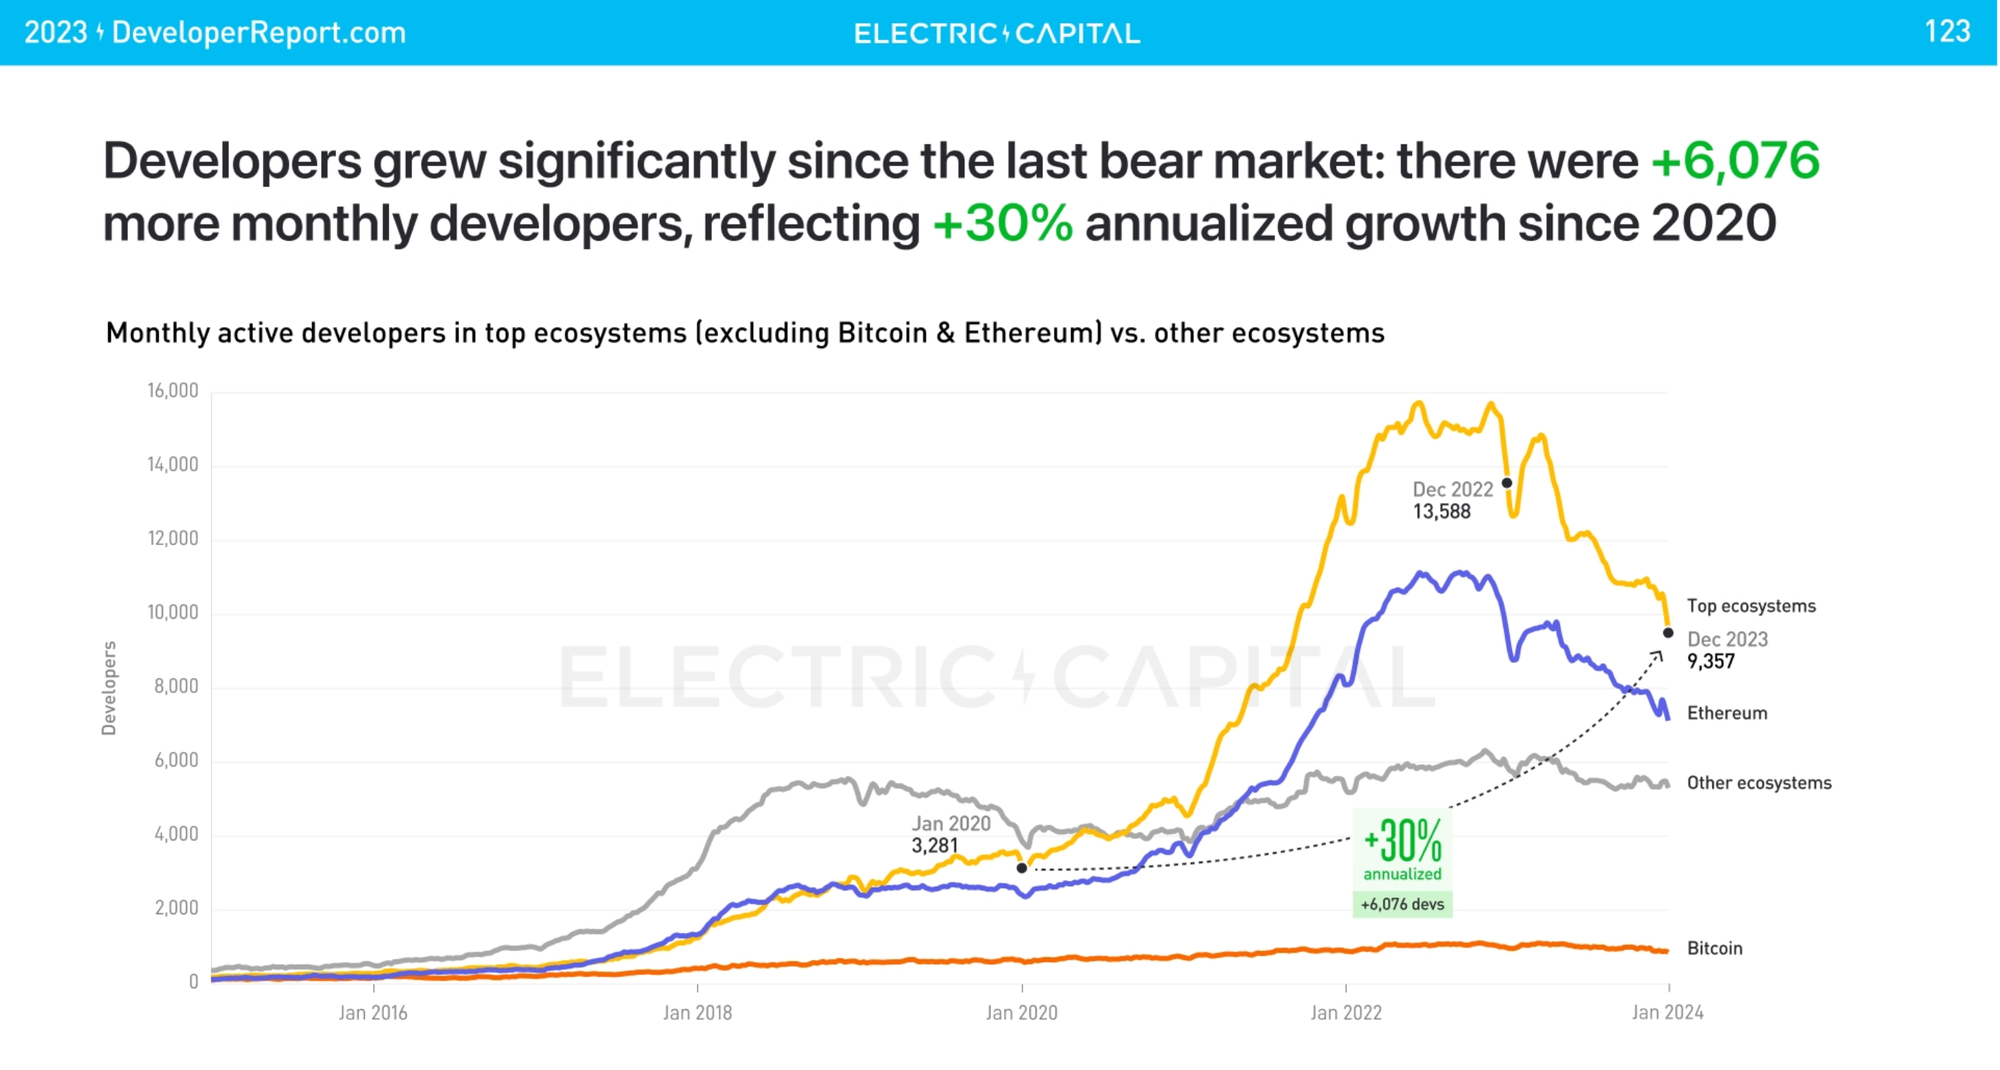 This chart shows the overall growth in blockchain developers from 2015 thorough 2023, taken from Electric Capital's Developer Report 2023.